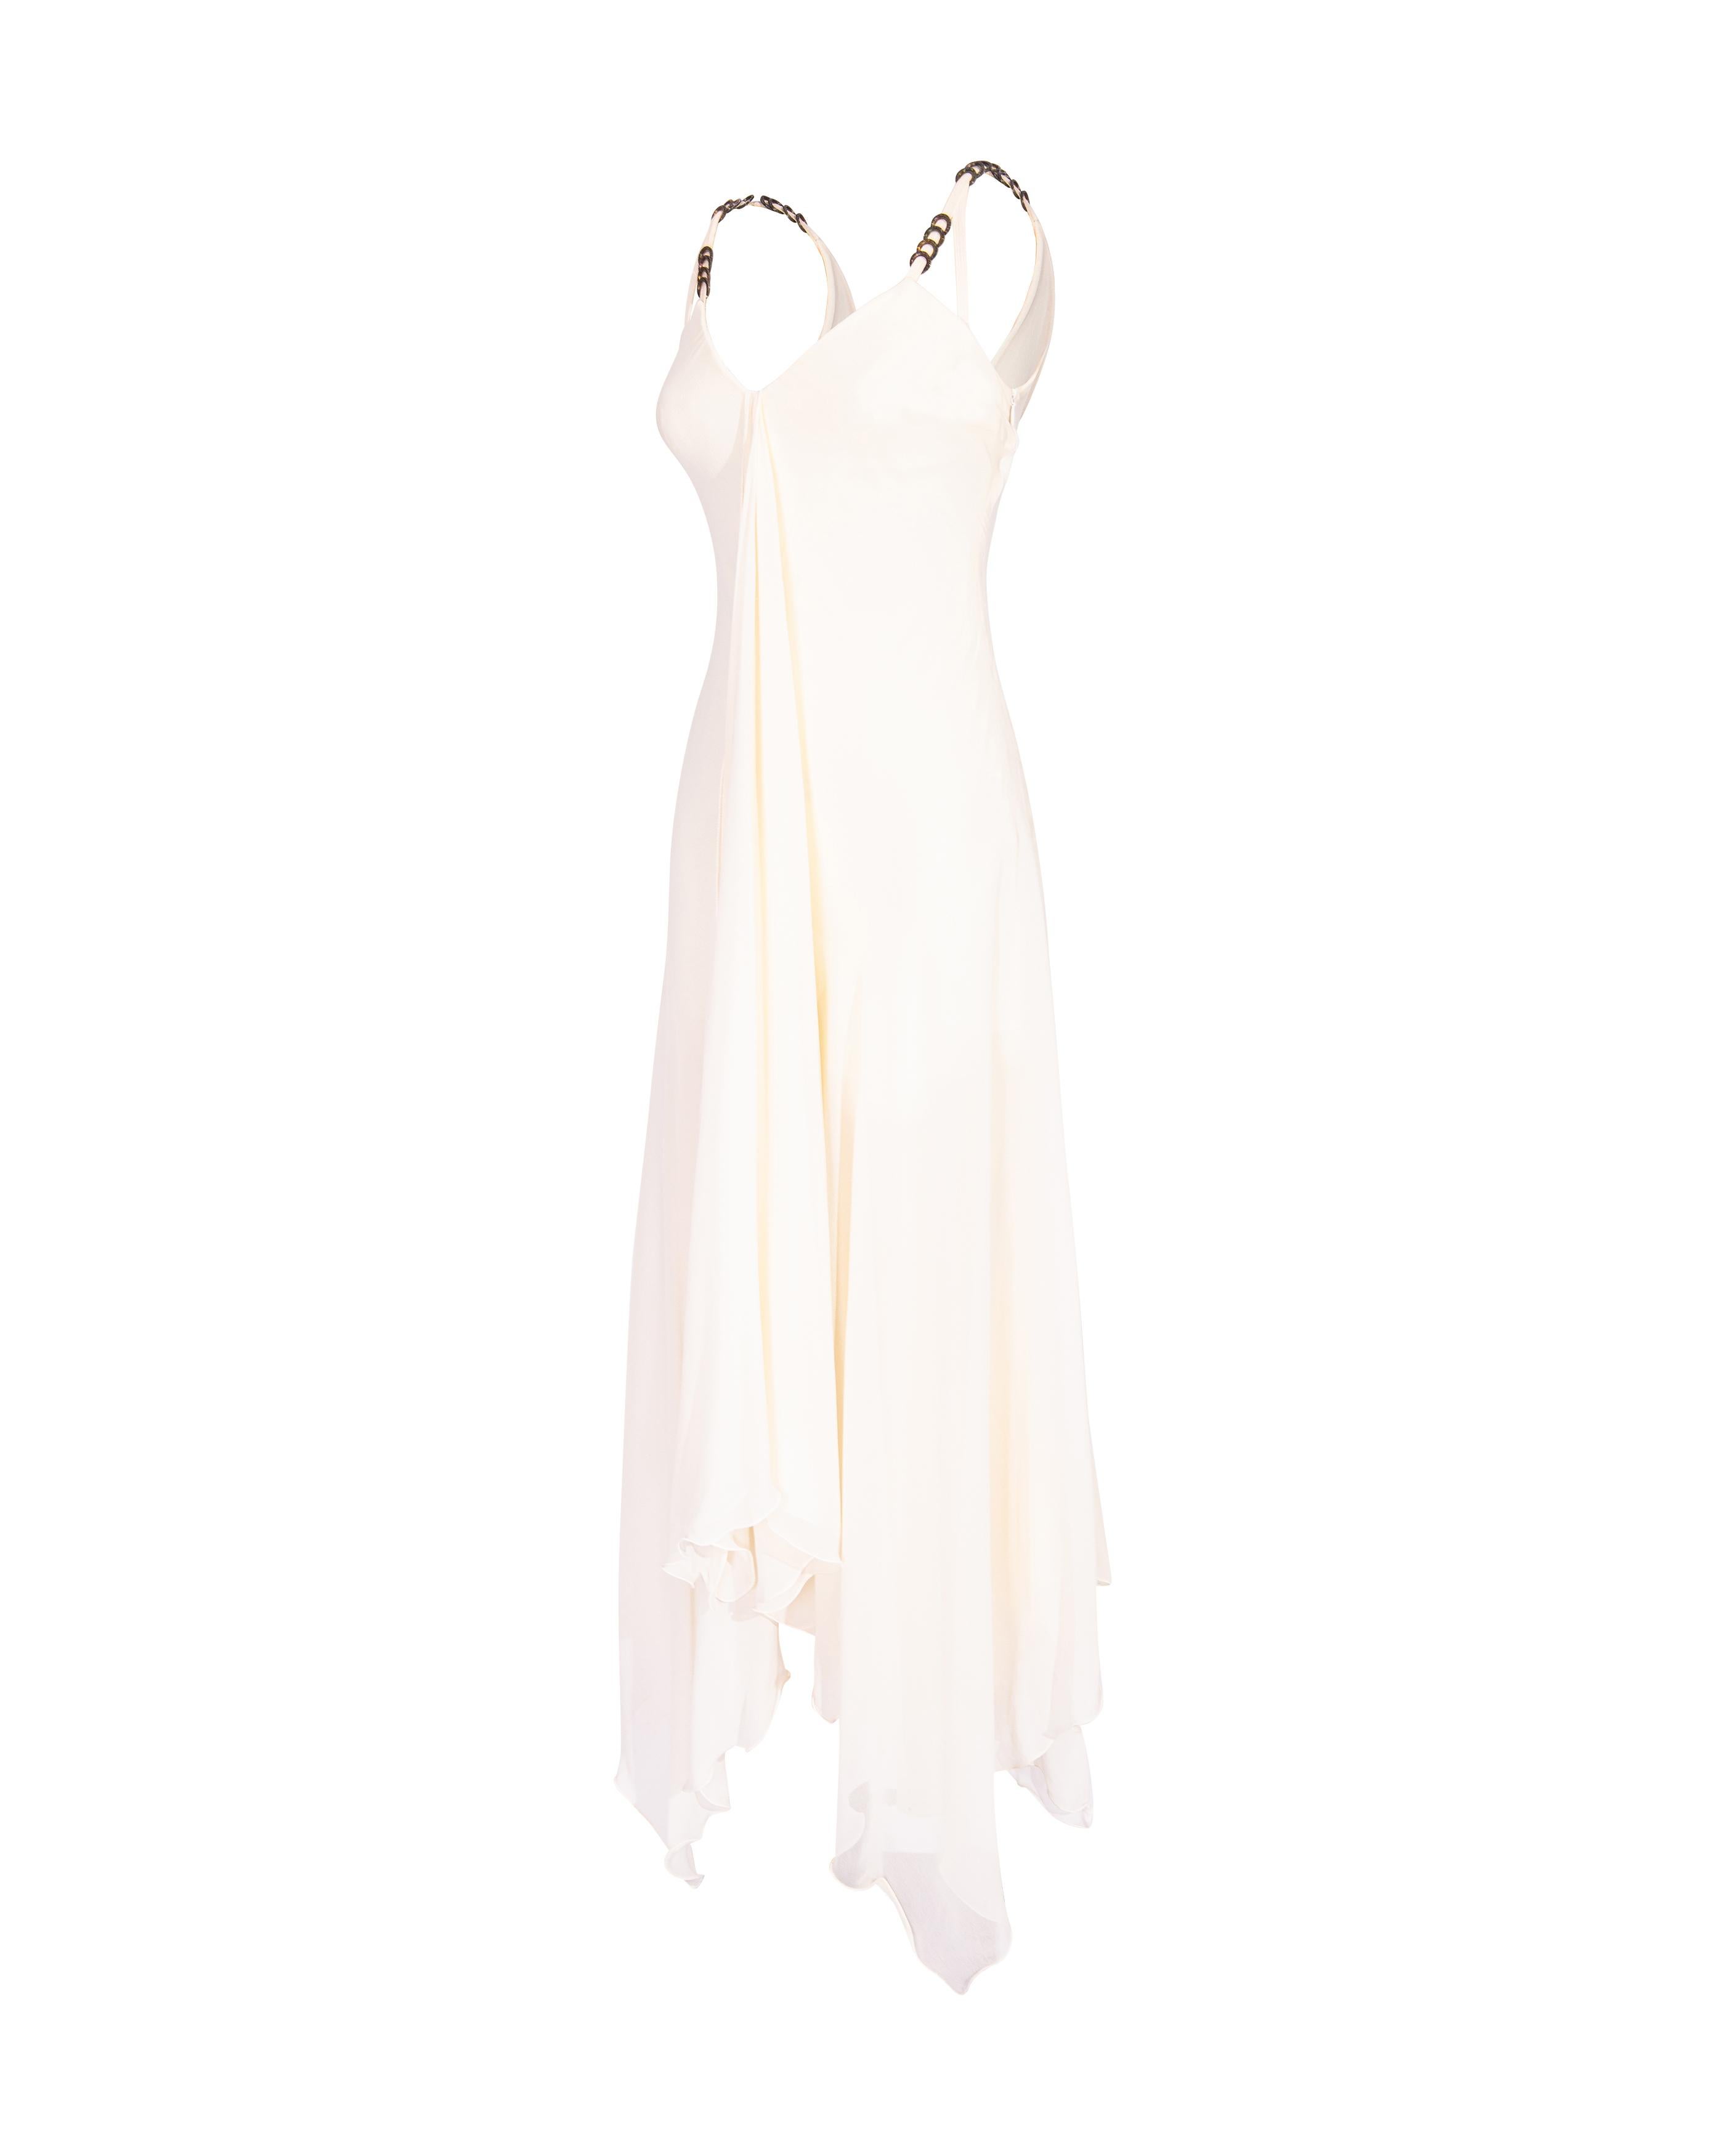 White S/S 1995 Gianni Versace Couture Silk Chiffon Drape Front Gown